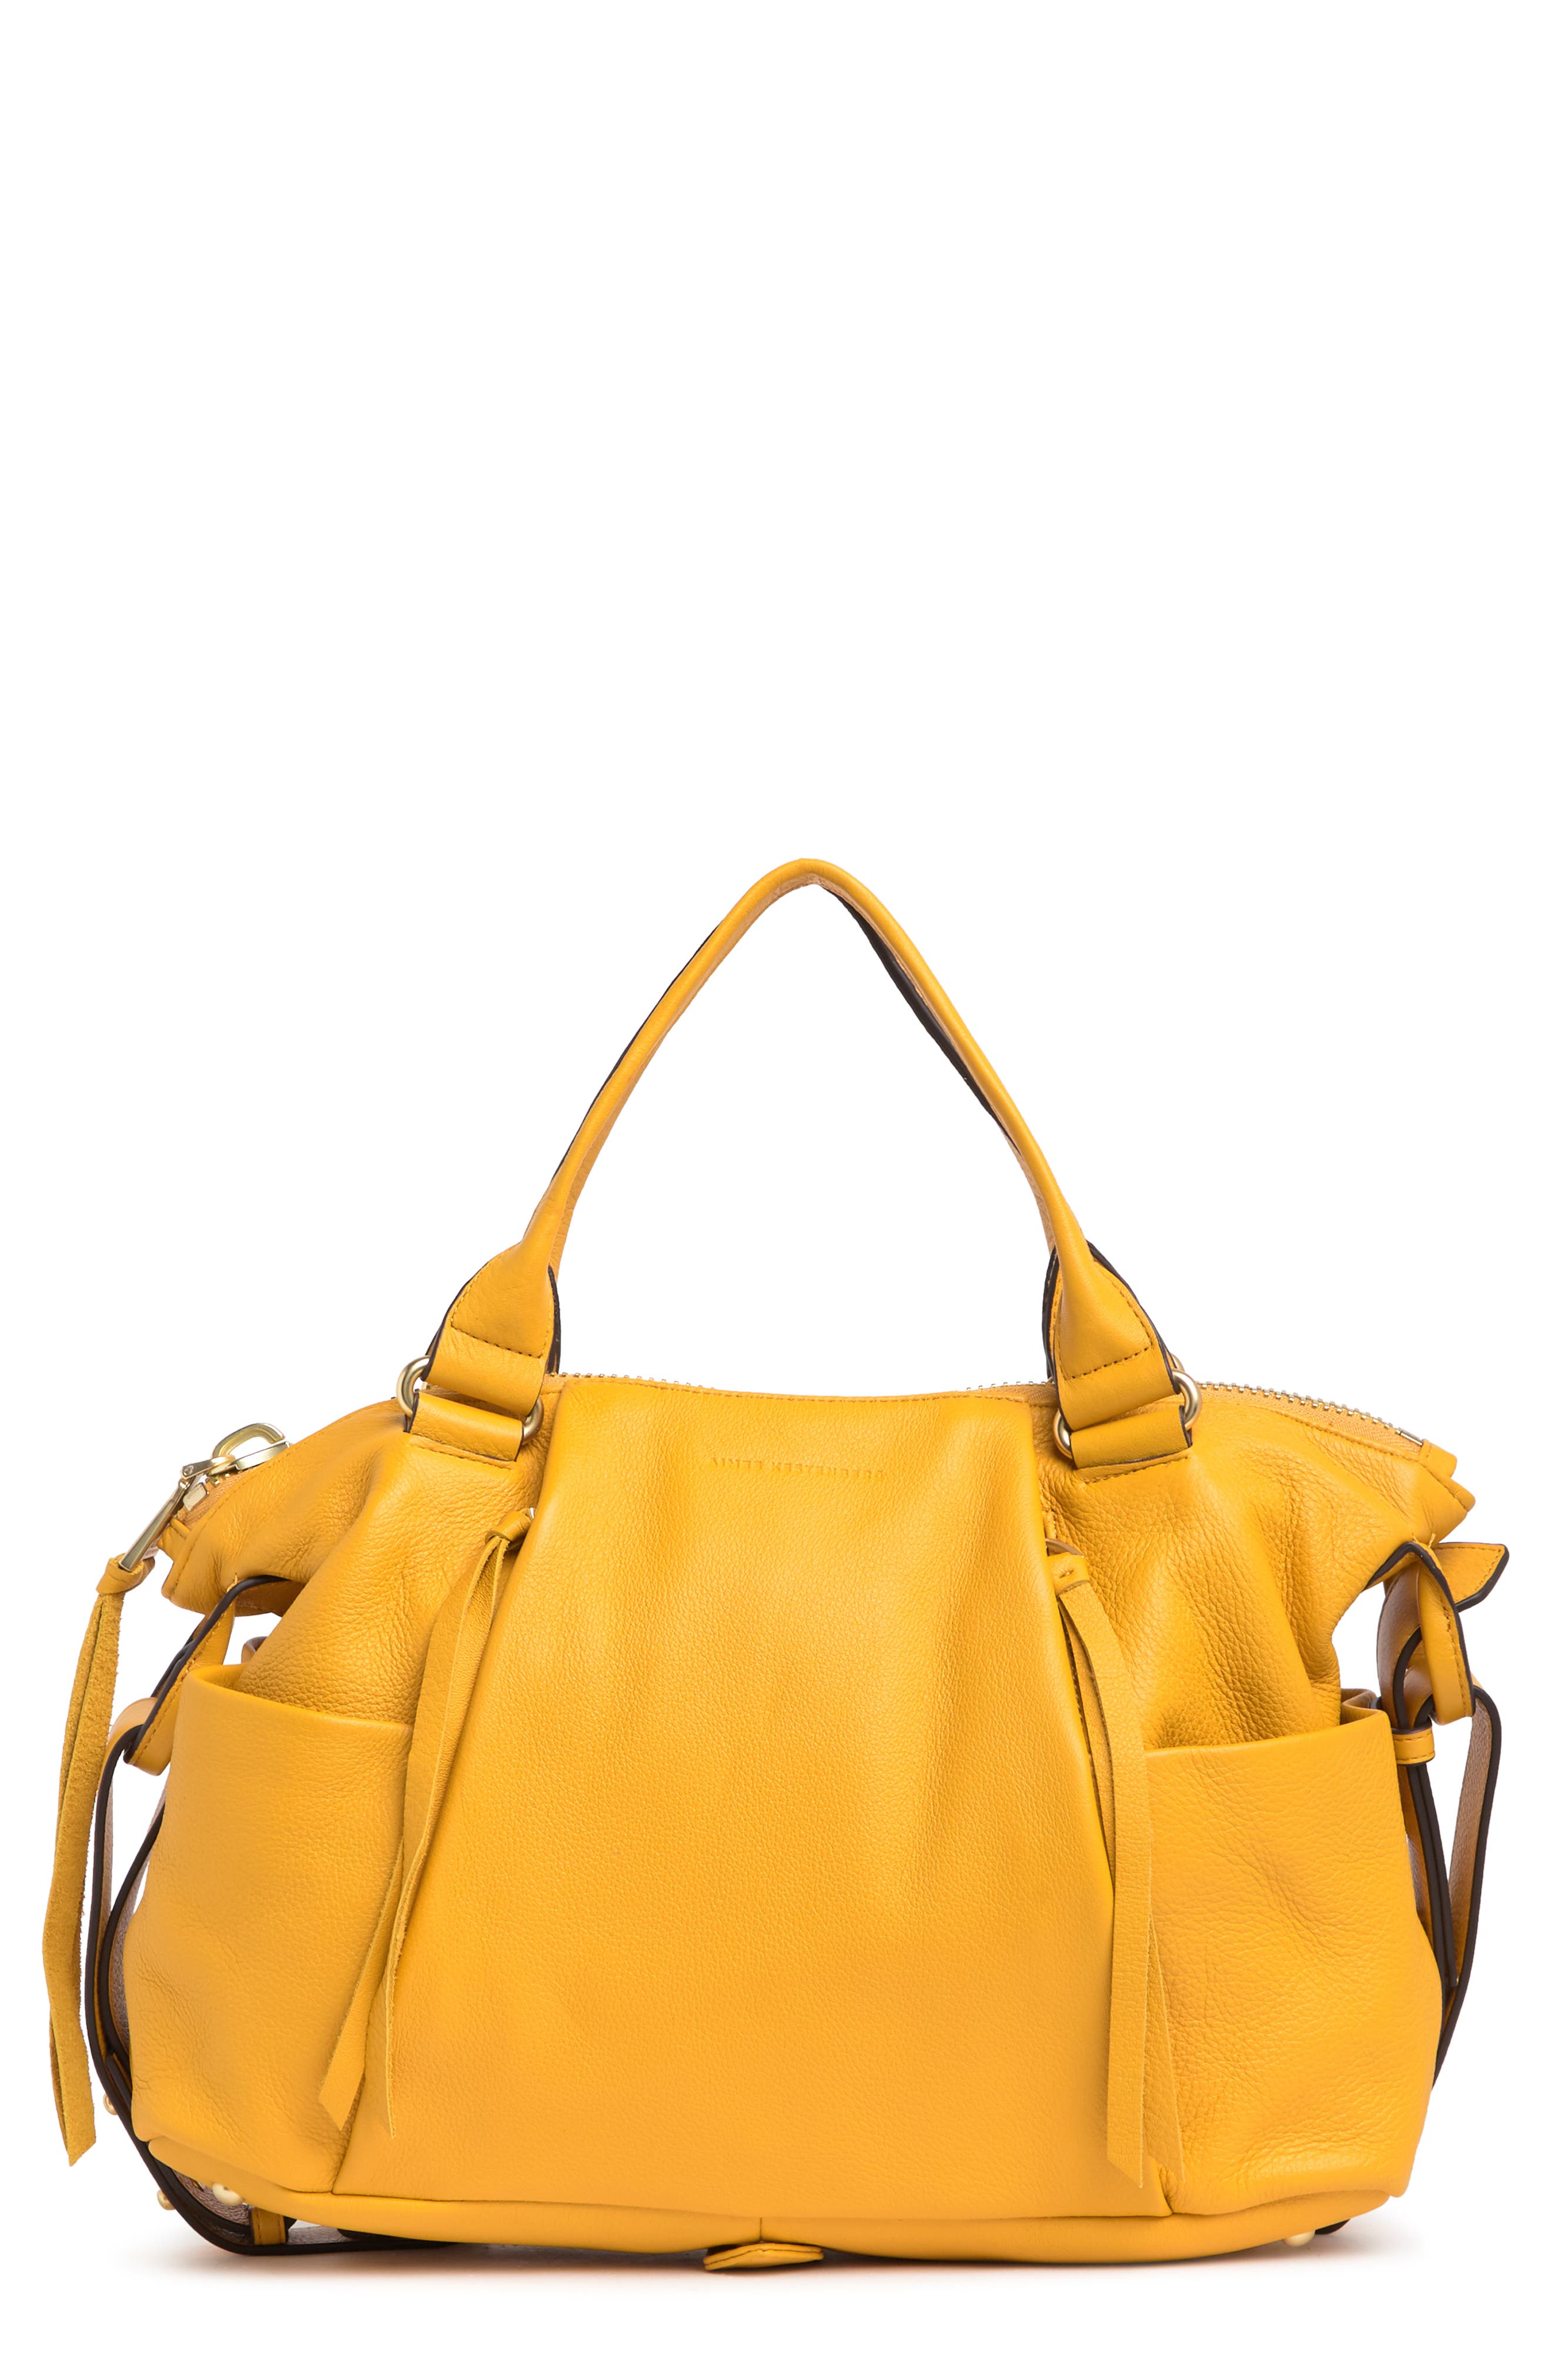 Aimee Kestenberg Tamitha Convertible Leather Satchel In Gold